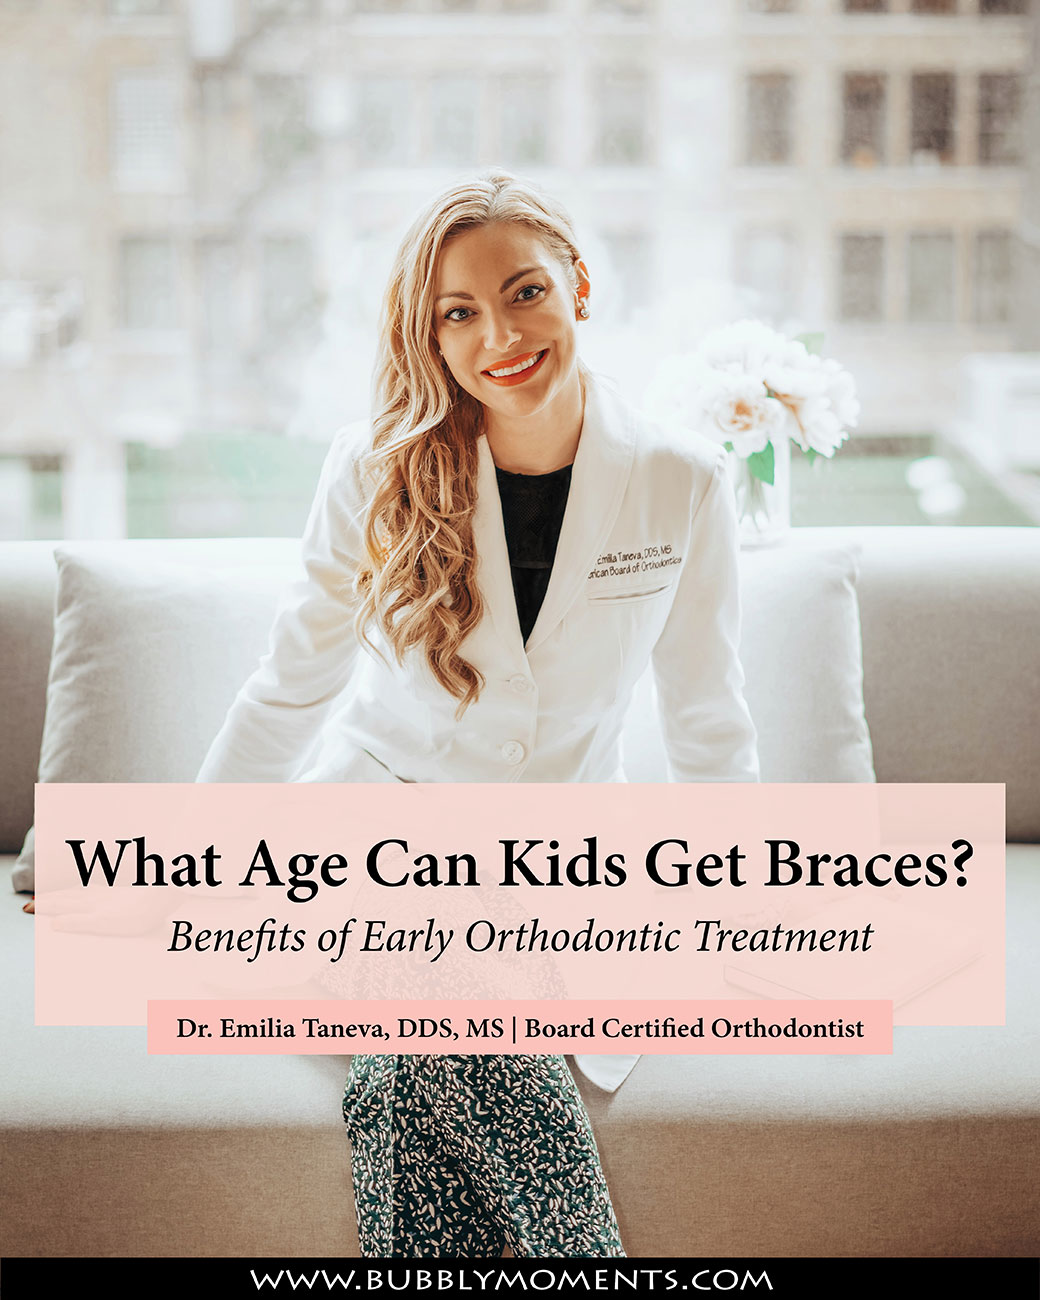 what age can kids get braces, braces, teeth straightening, invisible braces, metal braces